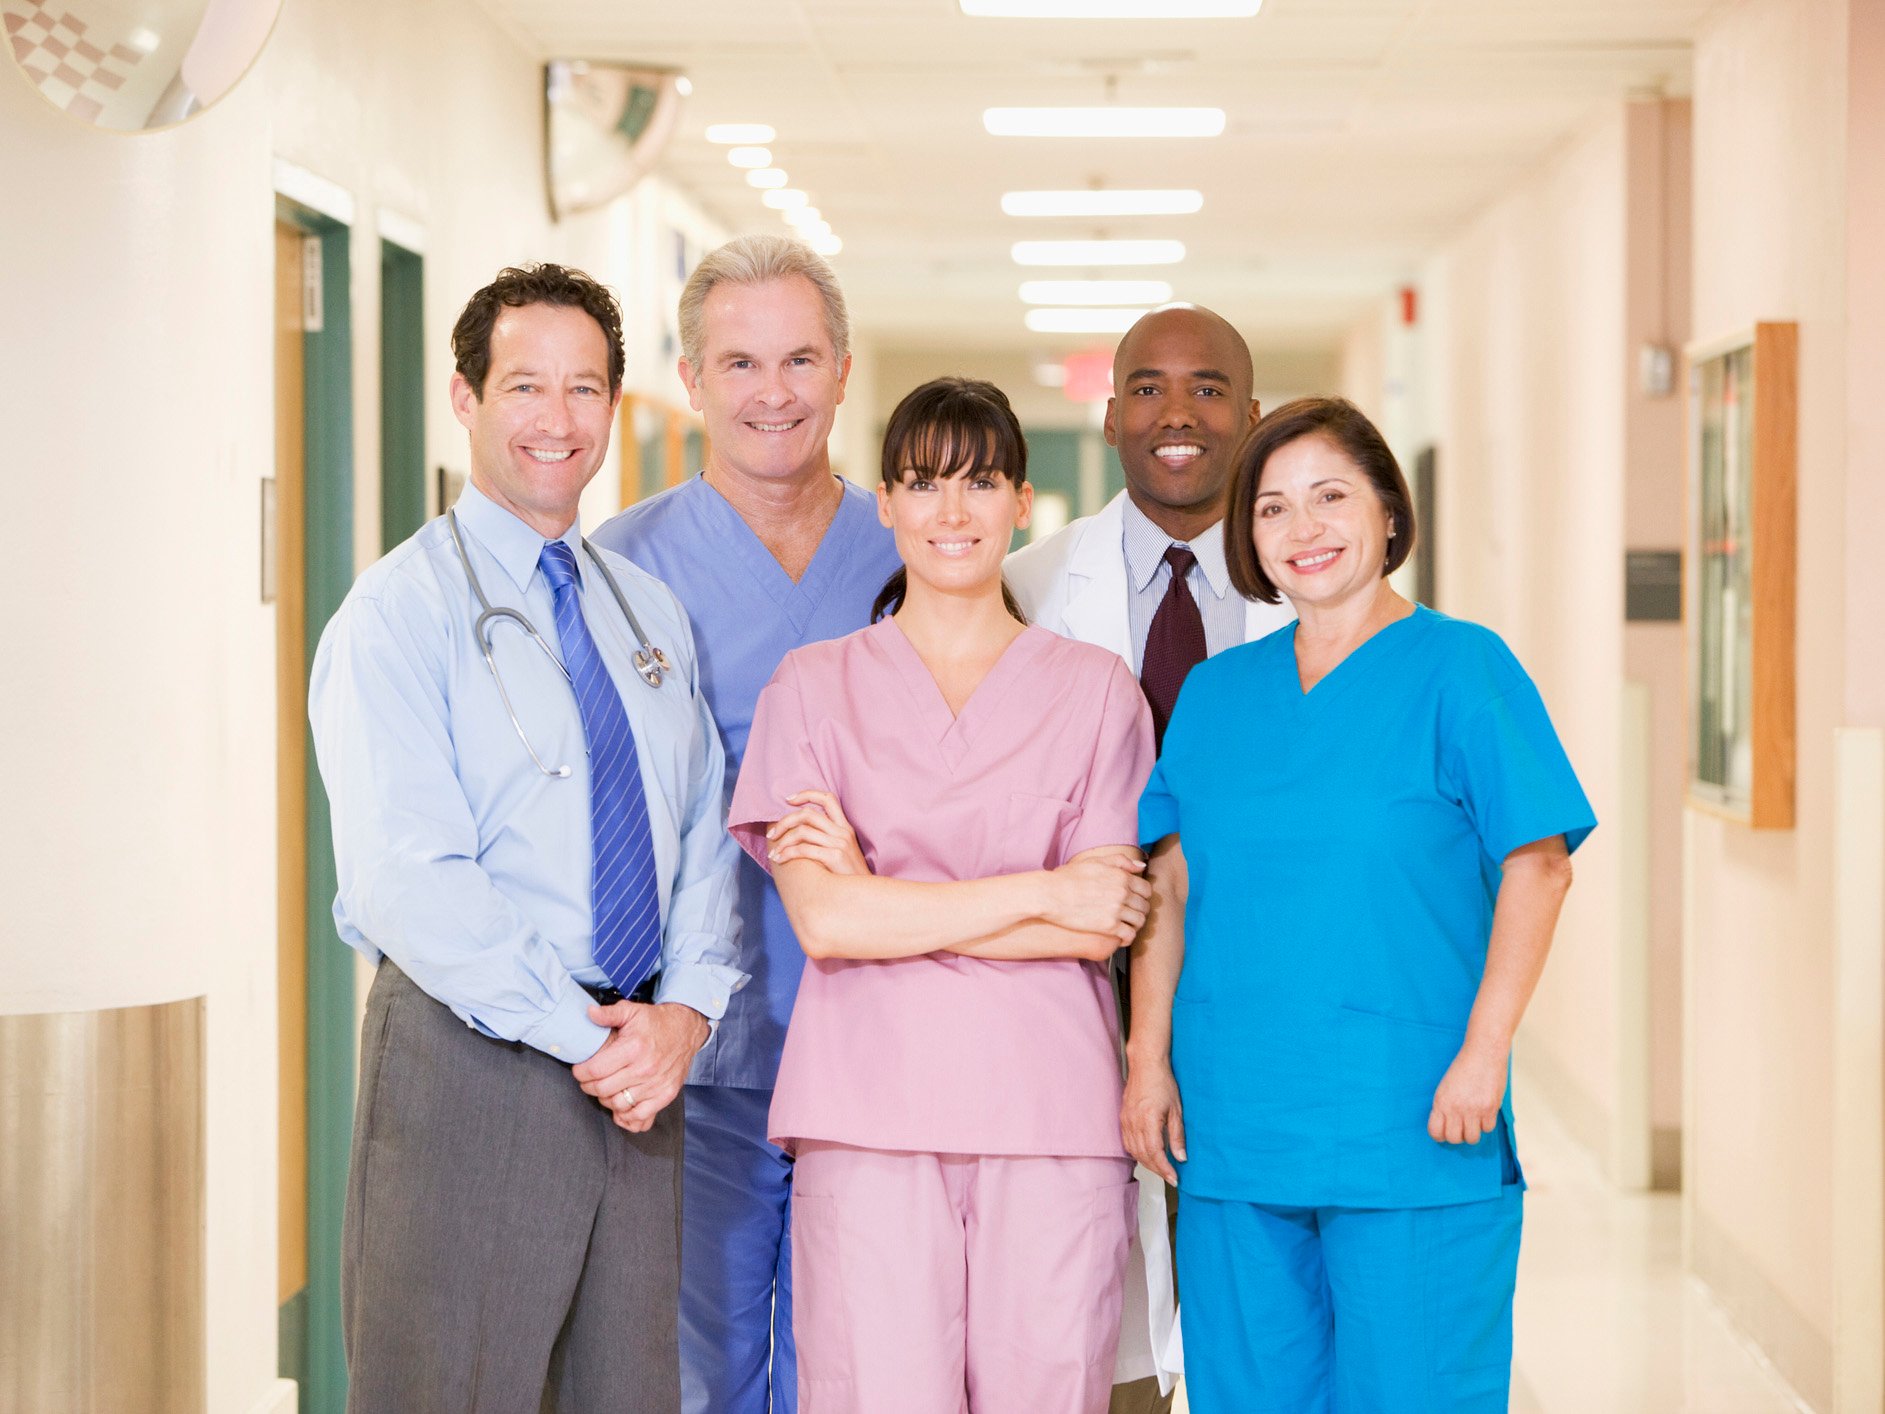 group of five doctors standing together smiling in hospital hallway